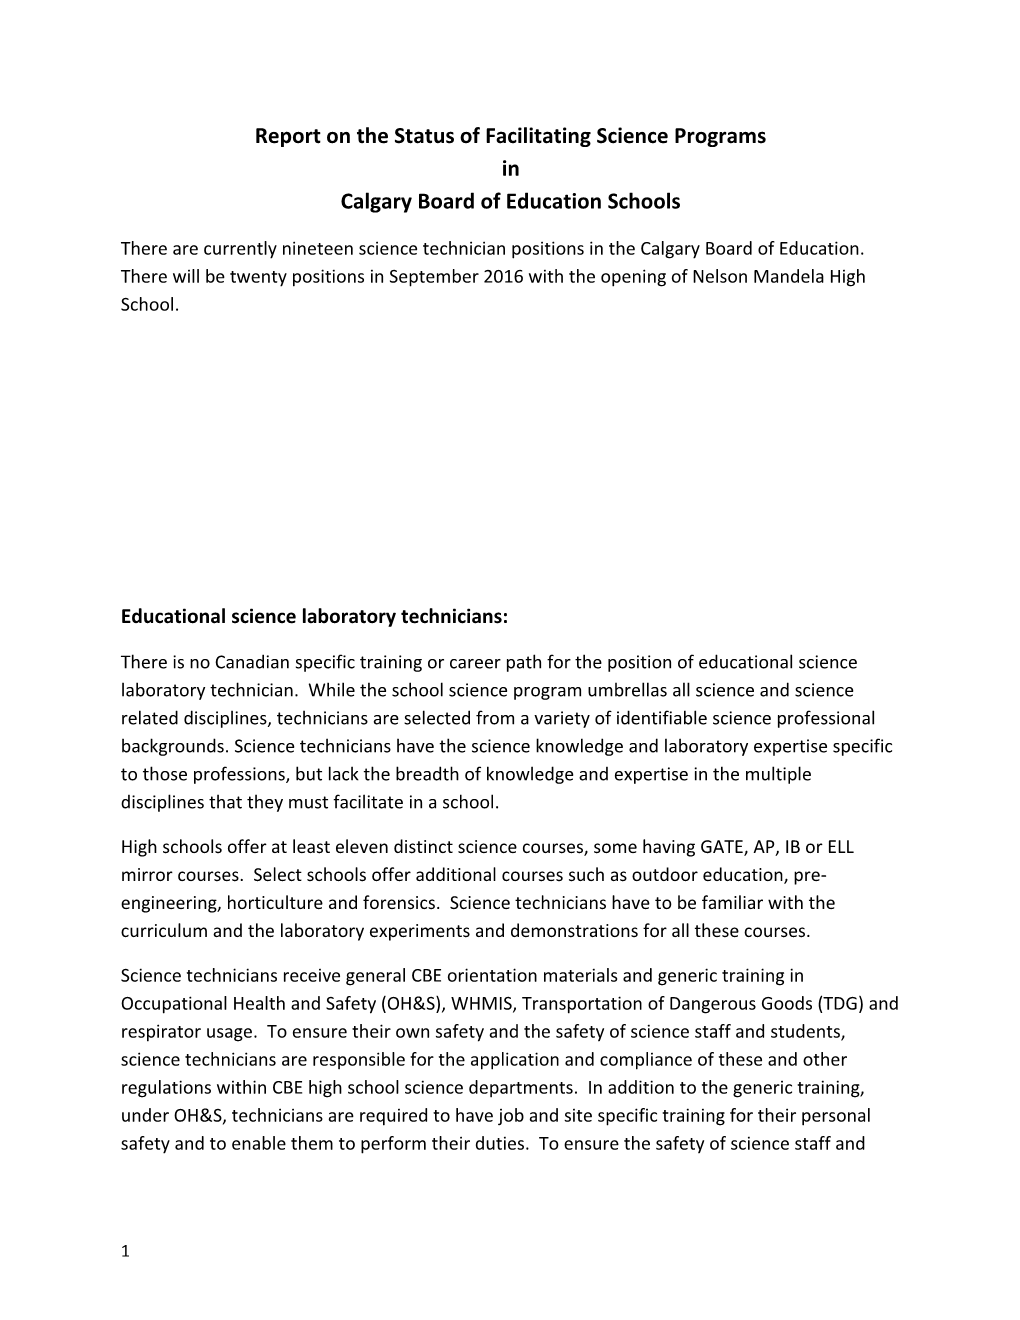 Report on the Status of Facilitating Science Programs in Calgary Board of Education Schools